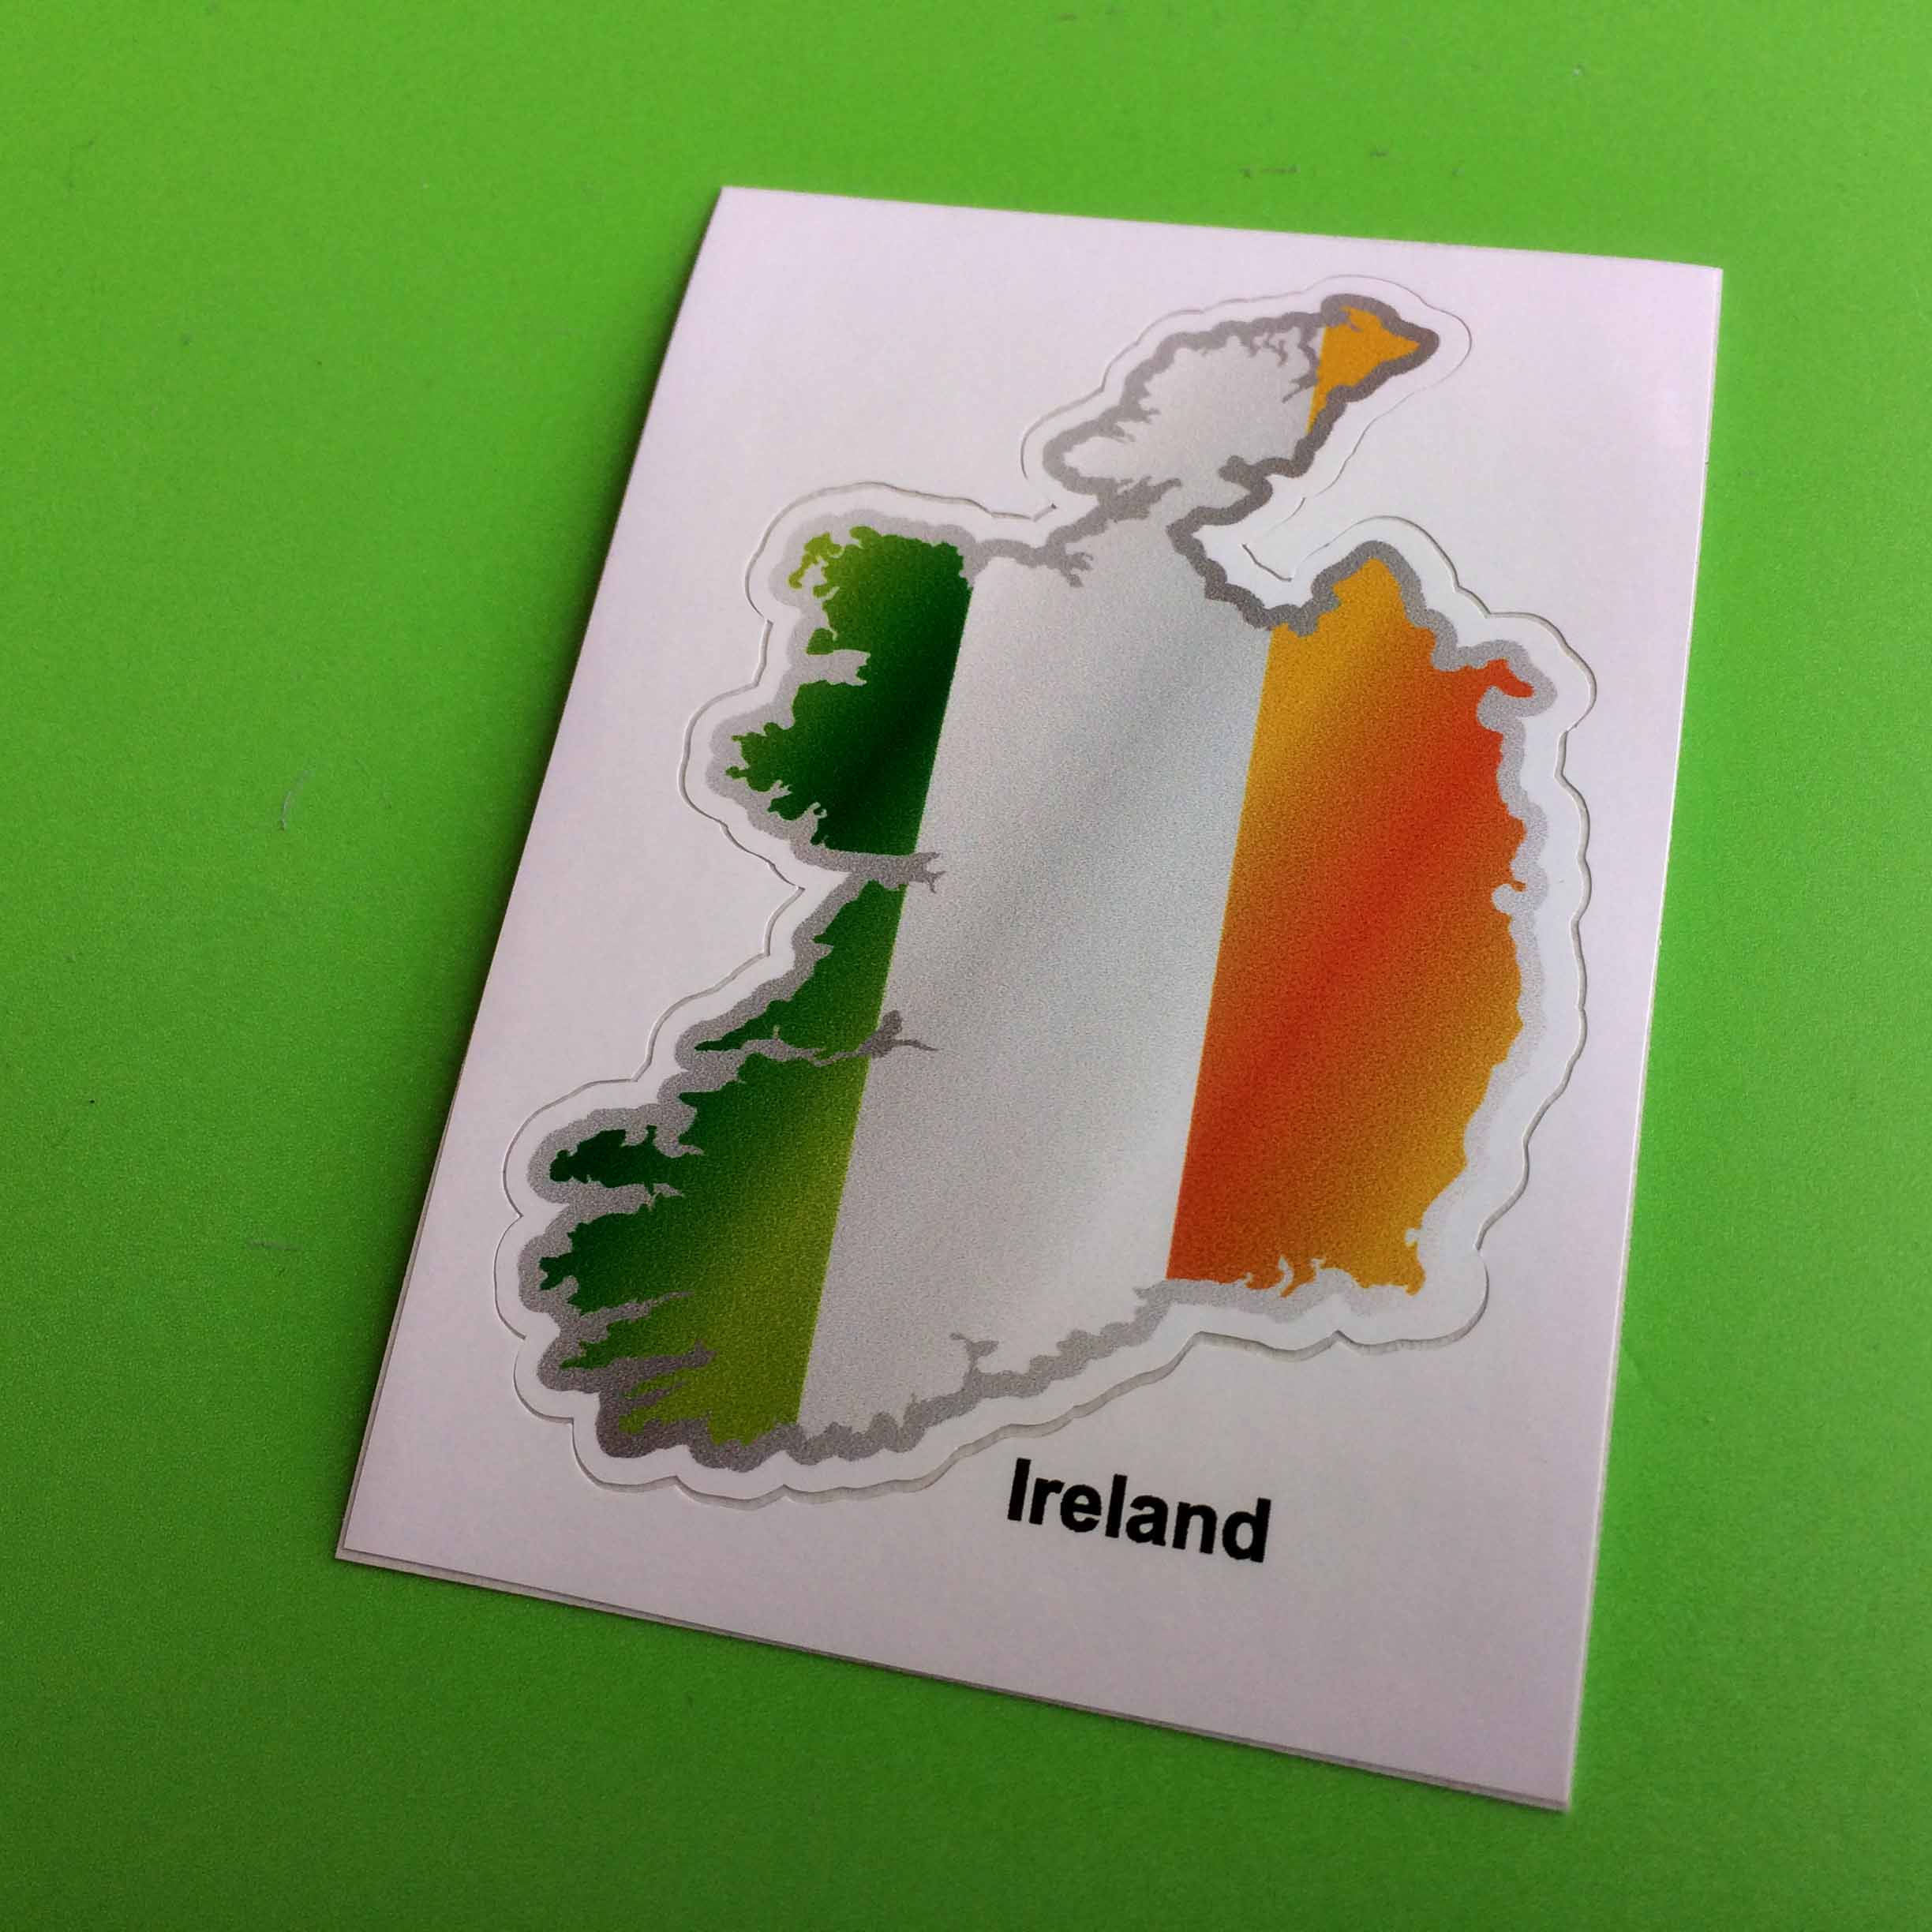 IRELAND FLAG AND MAP STICKER. An Ireland flag and map. A vertical tricolour of green, white and orange.